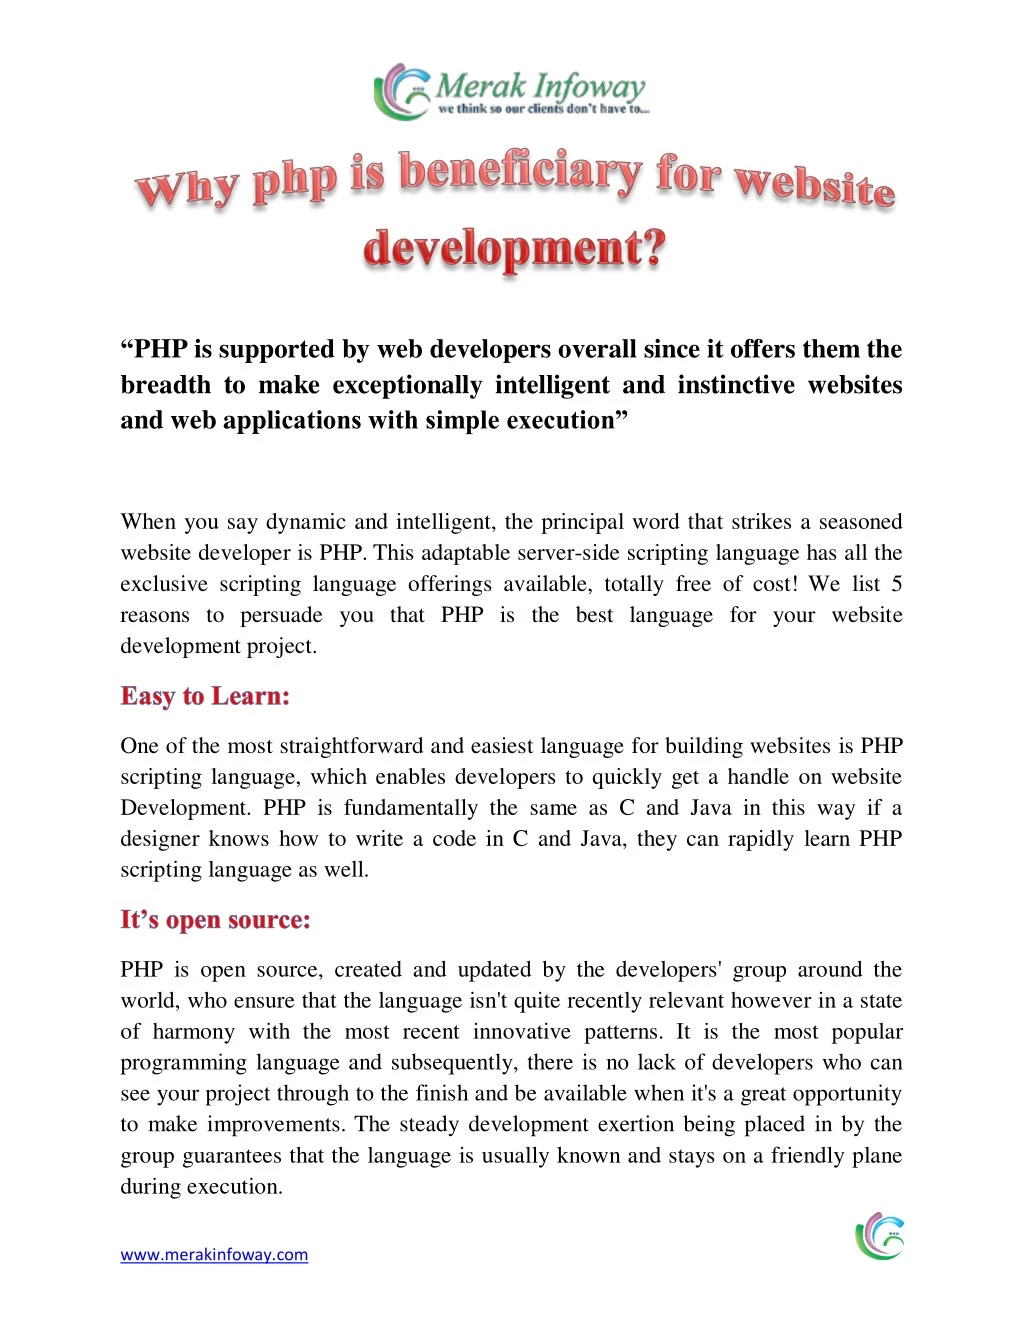 php is supported by web developers overall since